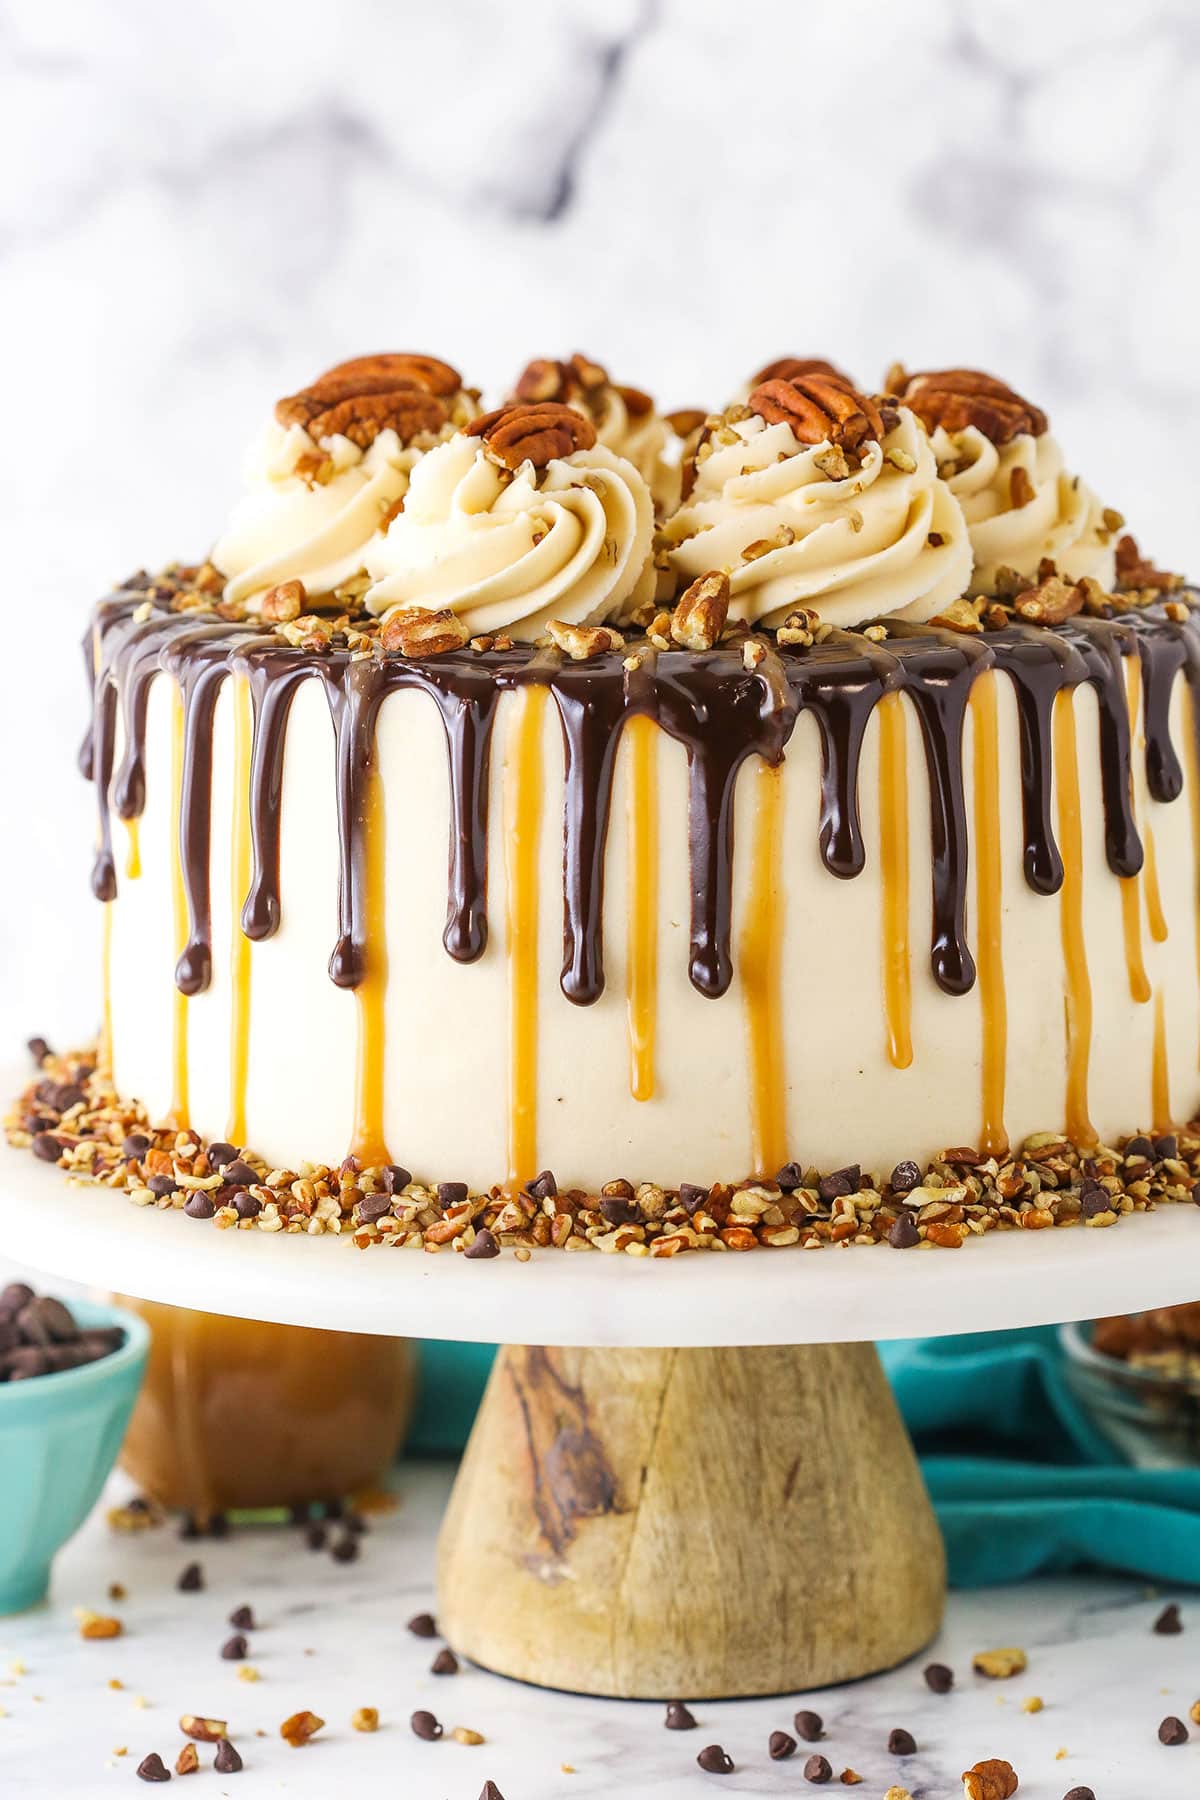 Chocolate Salted Caramel Cake with Sesame Snaps